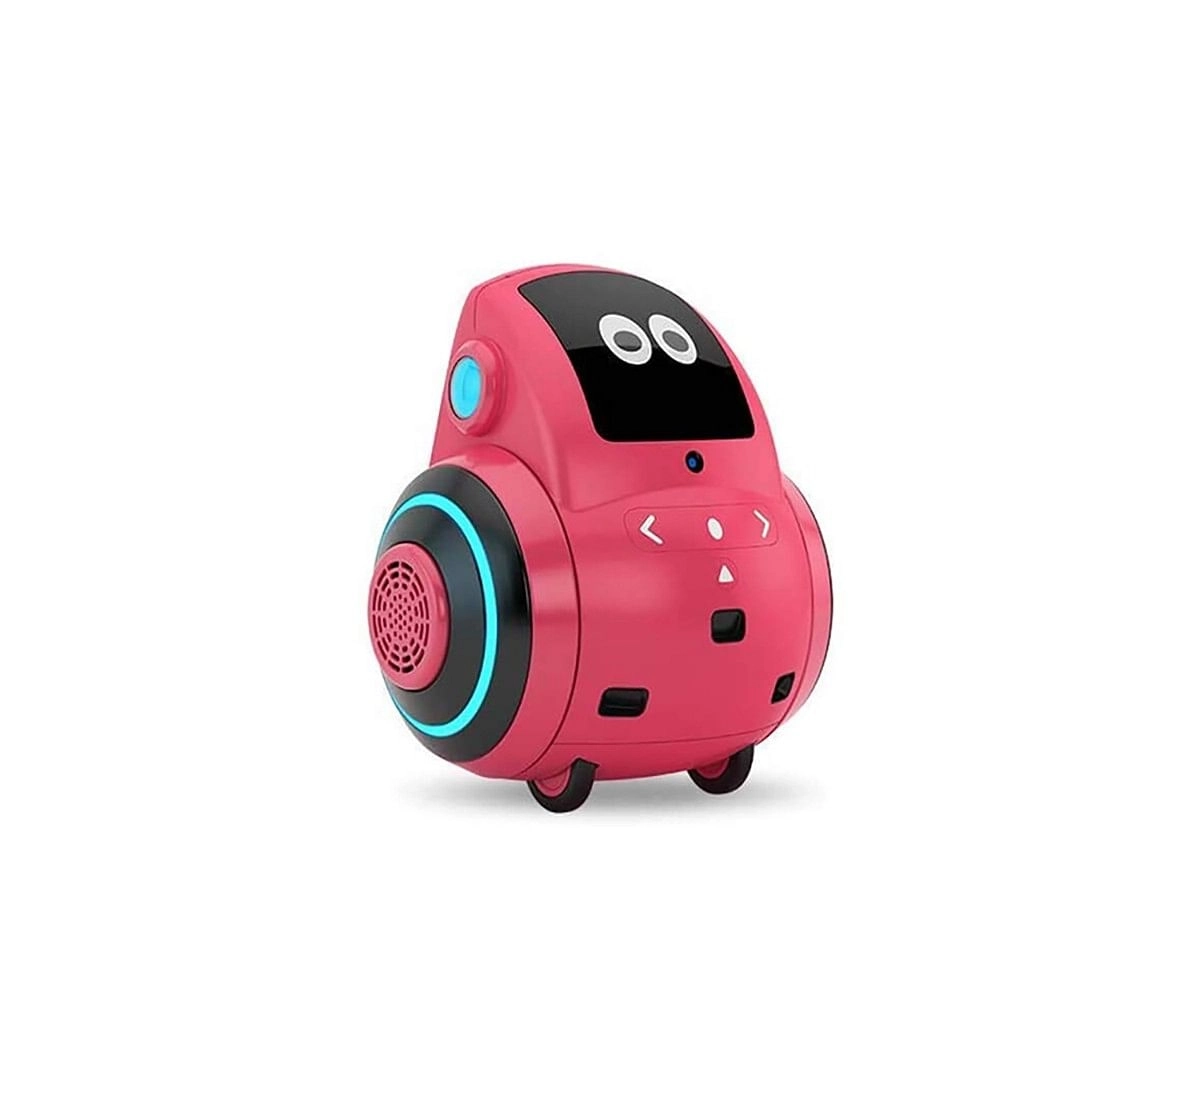 Shop Miko 2 My Companion Robot - Red Robotics for Kids age 5Y+ (Red)